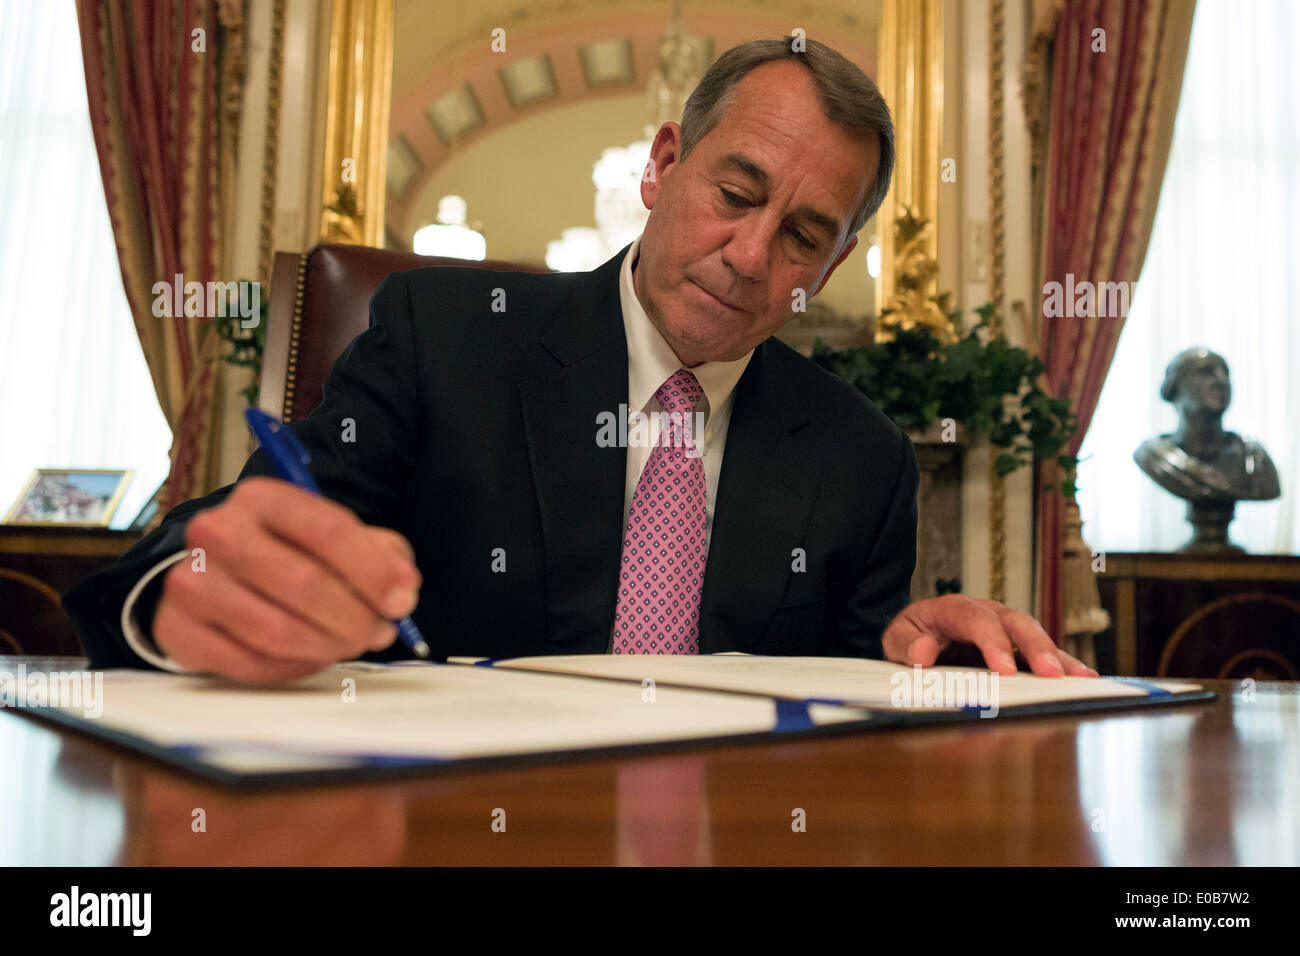 US House Speaker John Boehner signs the bipartisan Ukraine aid bill before sending it to the White House for final action from the President April 30, 2014 in Washington, DC. Stock Photo